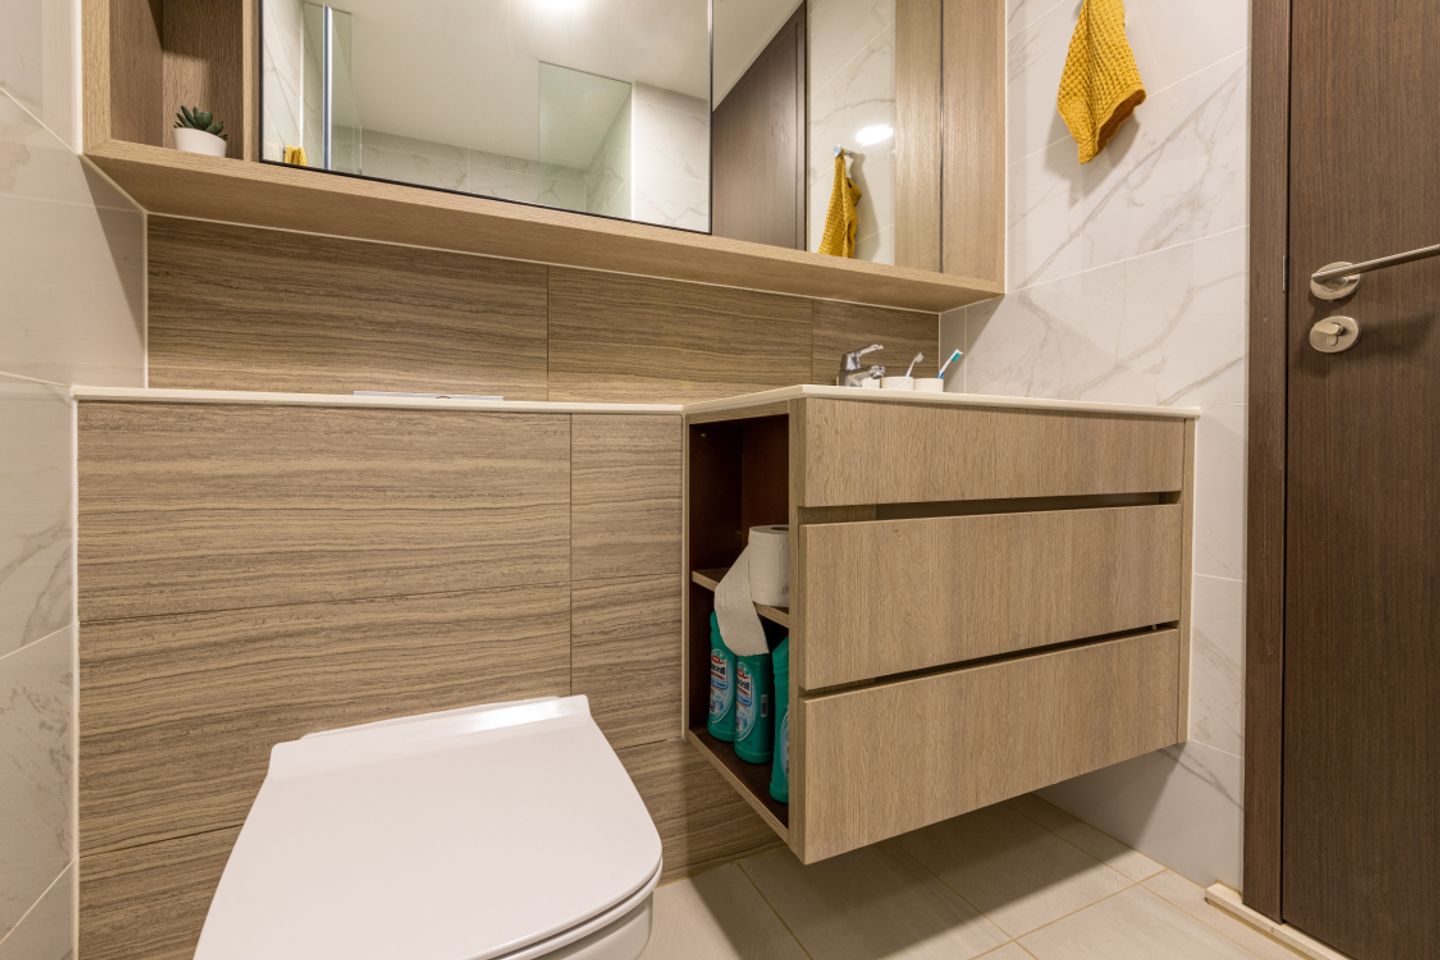 Spacious Bathroom Design With Drawer Units - Livspace